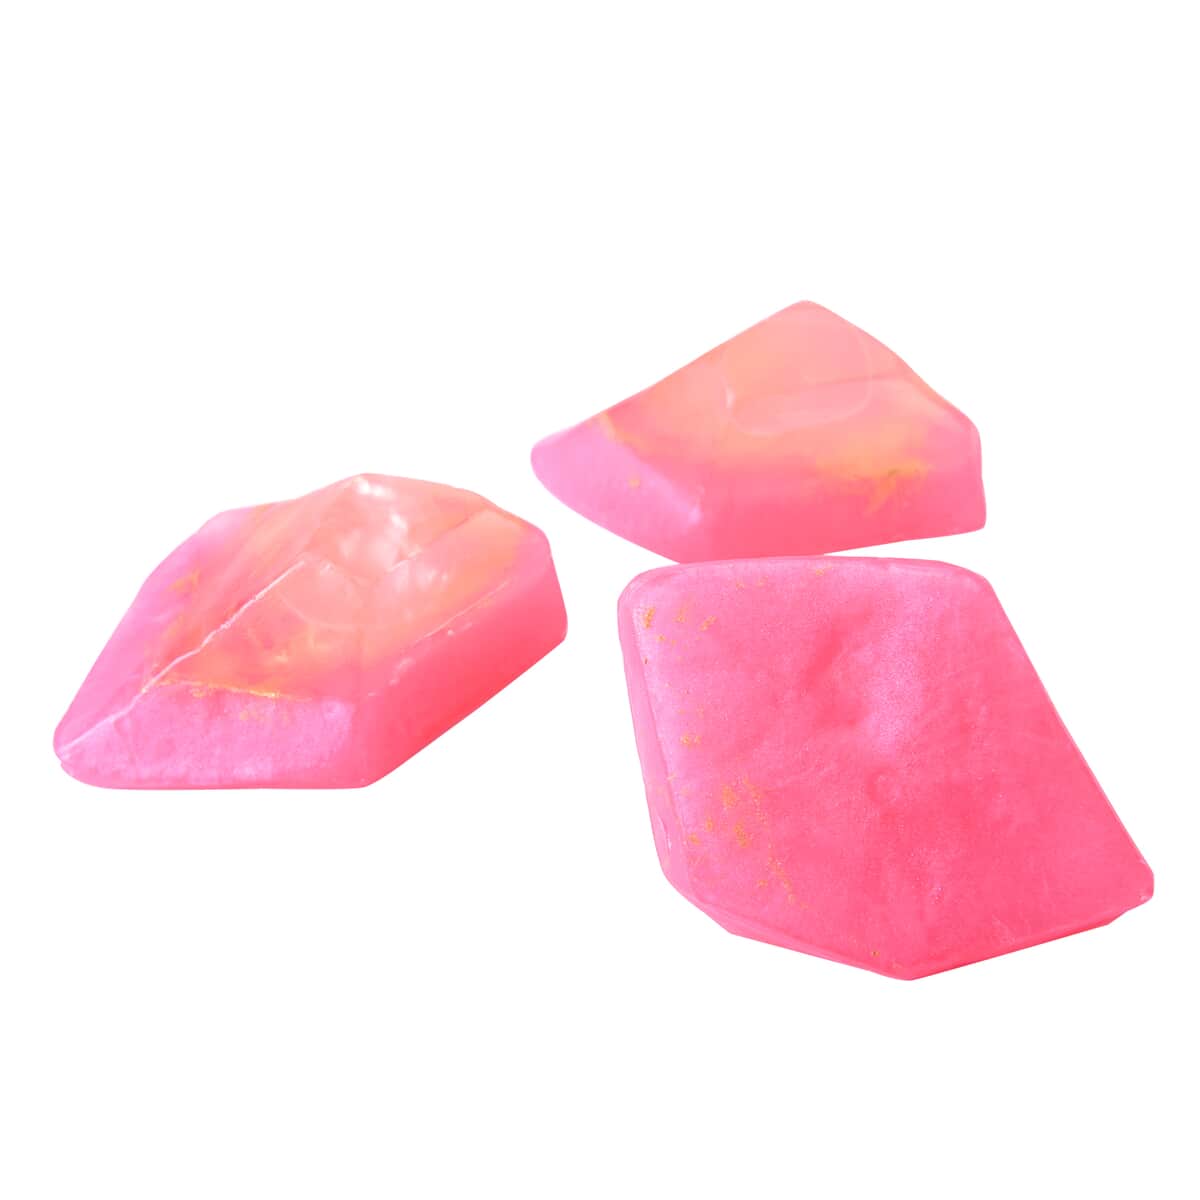 MARIGOLD & LOTUS 3pc Set Rose Quartz Soap Rock with Crystal Infused and Strawberry Fragrance image number 6